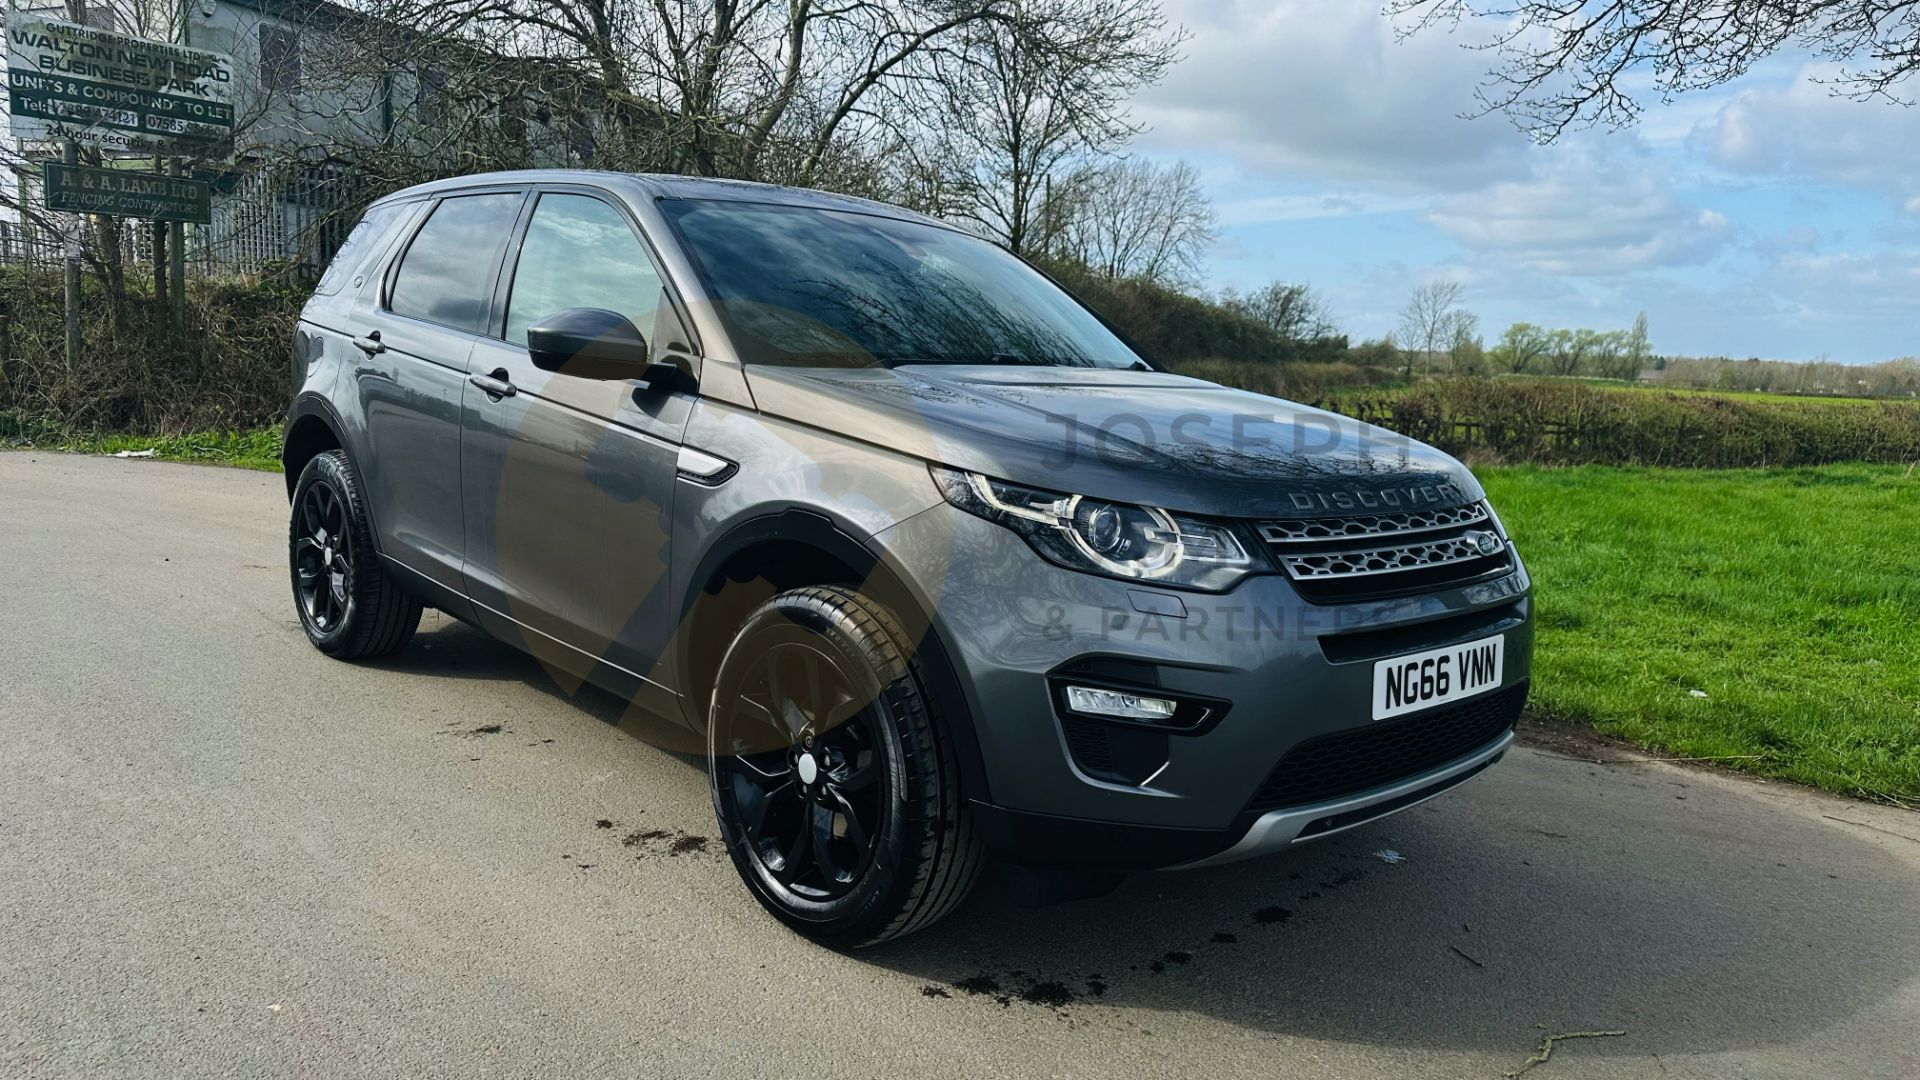 (On Sale) LAND ROVER DISCOVERY SPORT *HSE EDITION* 7 SEATER SUV (2017 - EURO 6) 2.0 TD4 - AUTOMATIC - Image 3 of 48